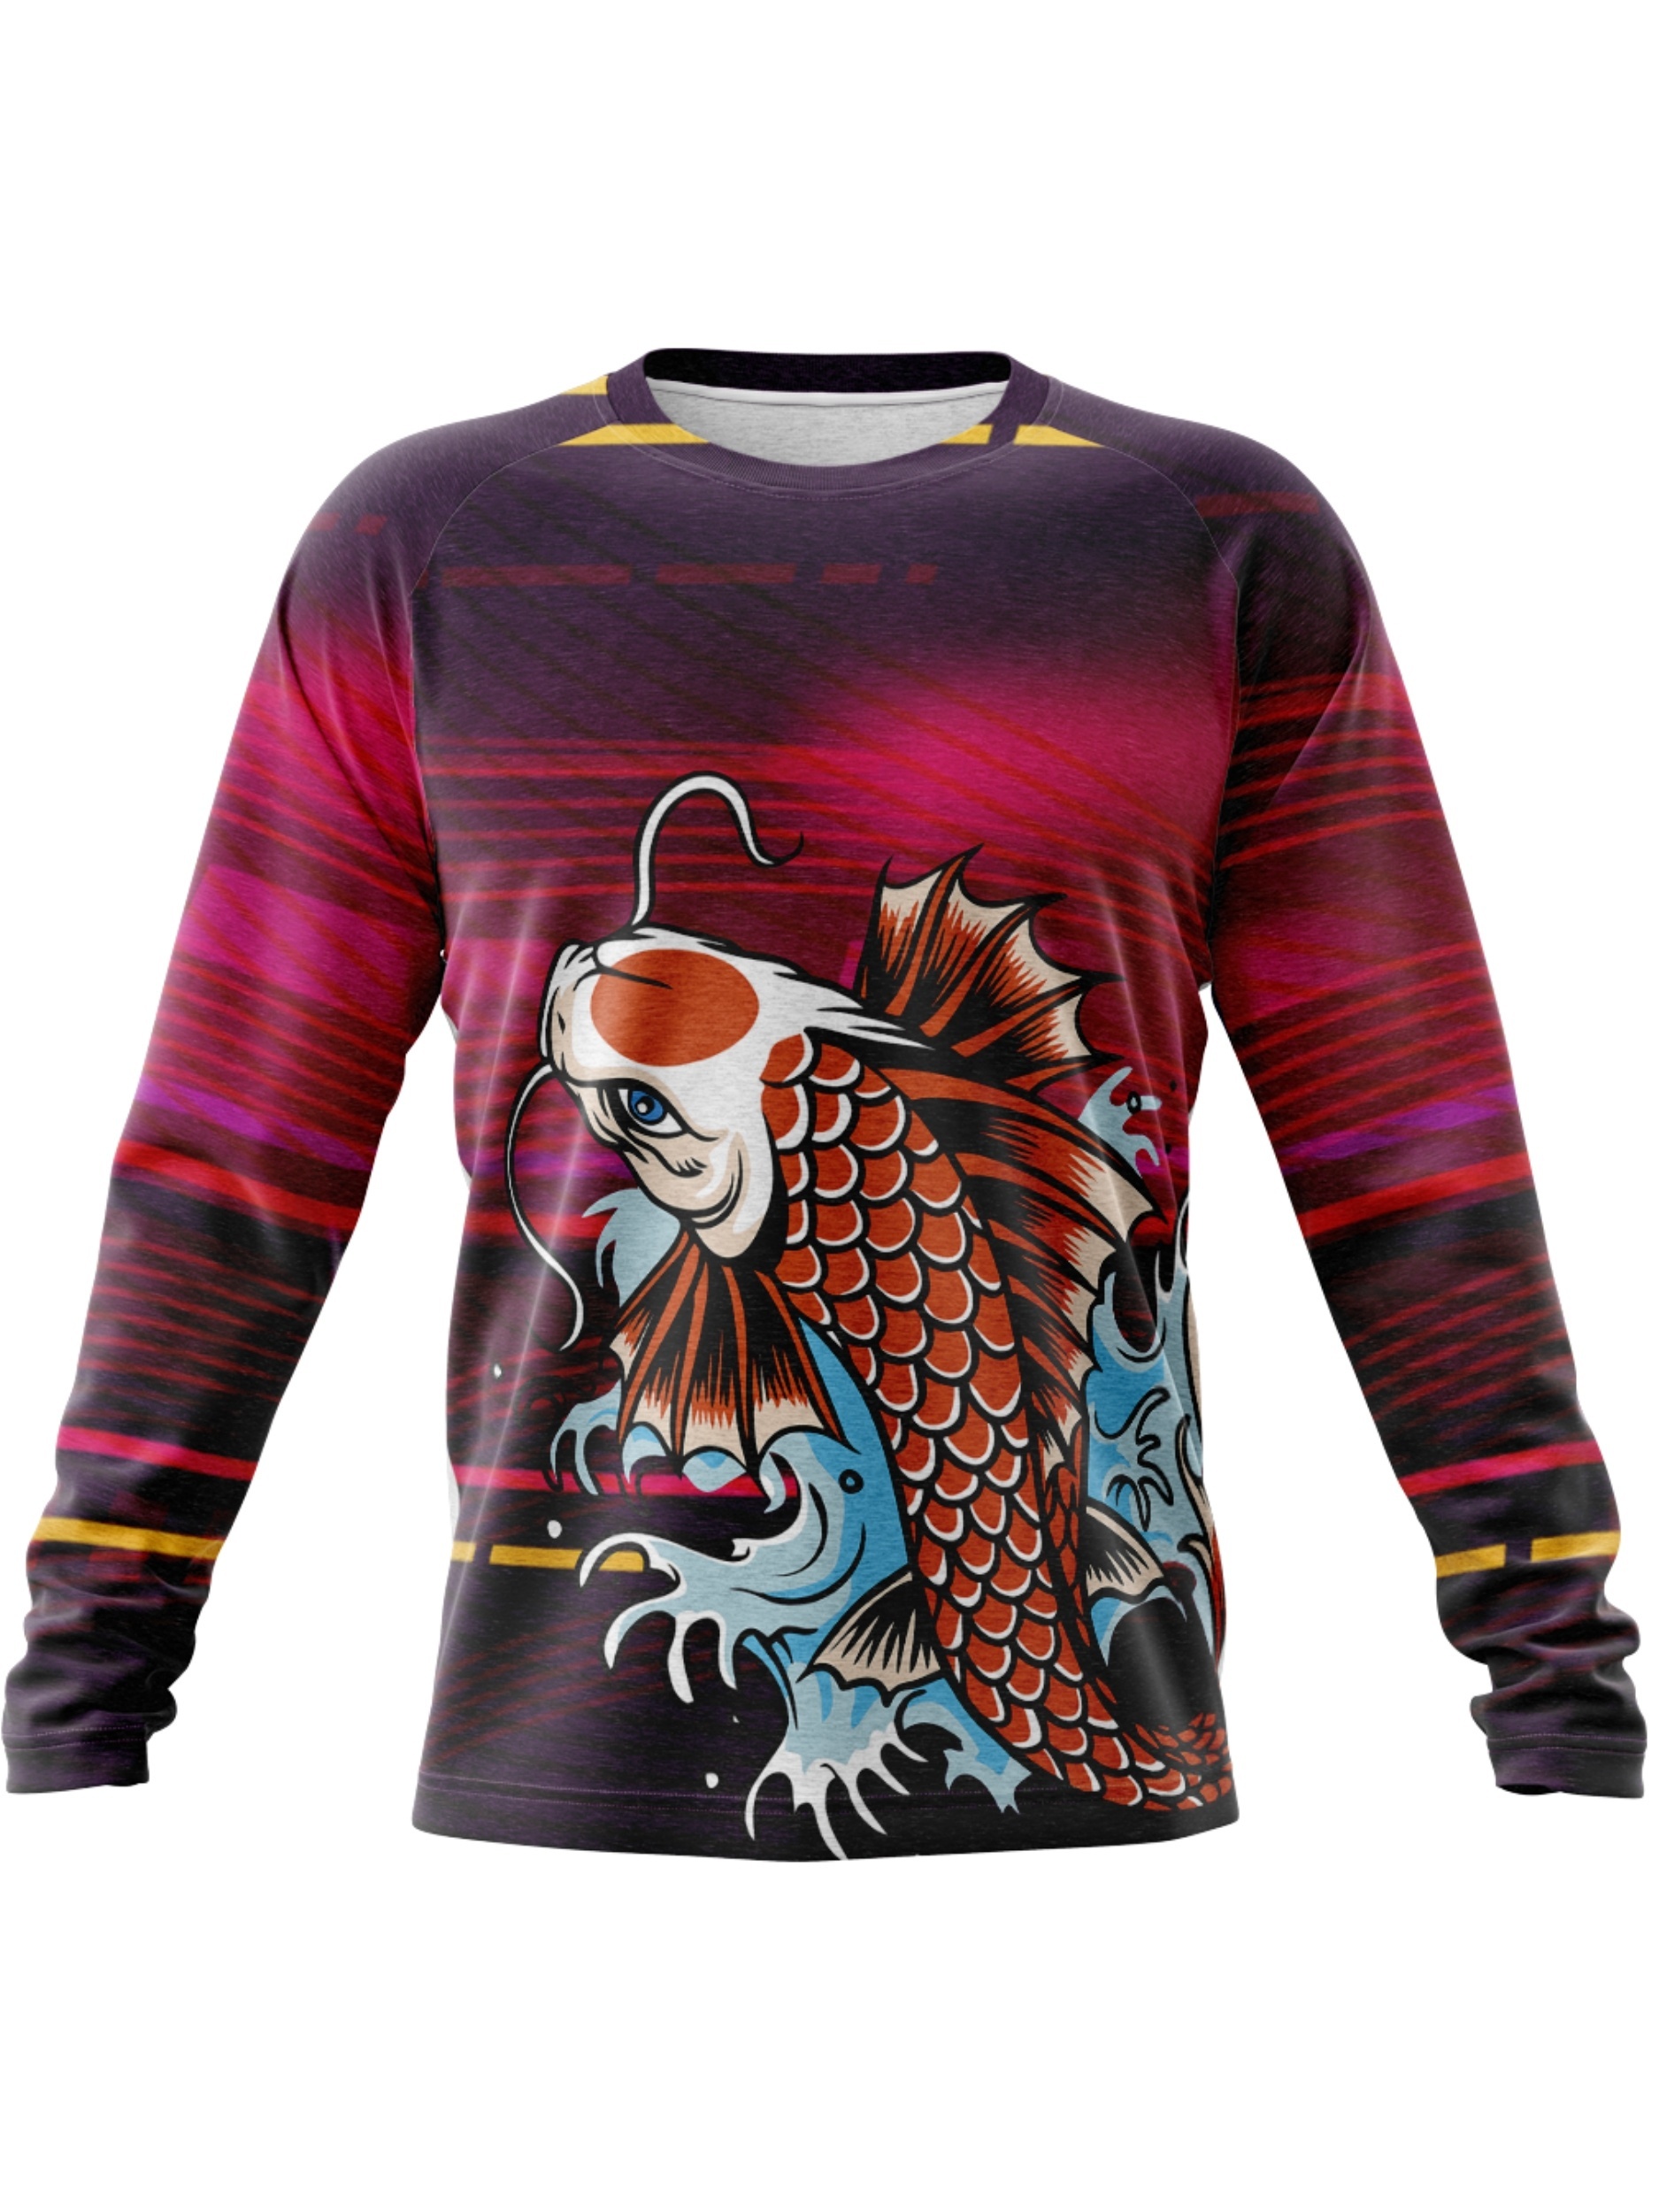 Various Fish Pattern Men's Fashion Stretch Breathable Long Sleeve Round Neck T-Shirt, Blouses, Tees for Spring Fall Outdoor Hunting Fishing Hiking